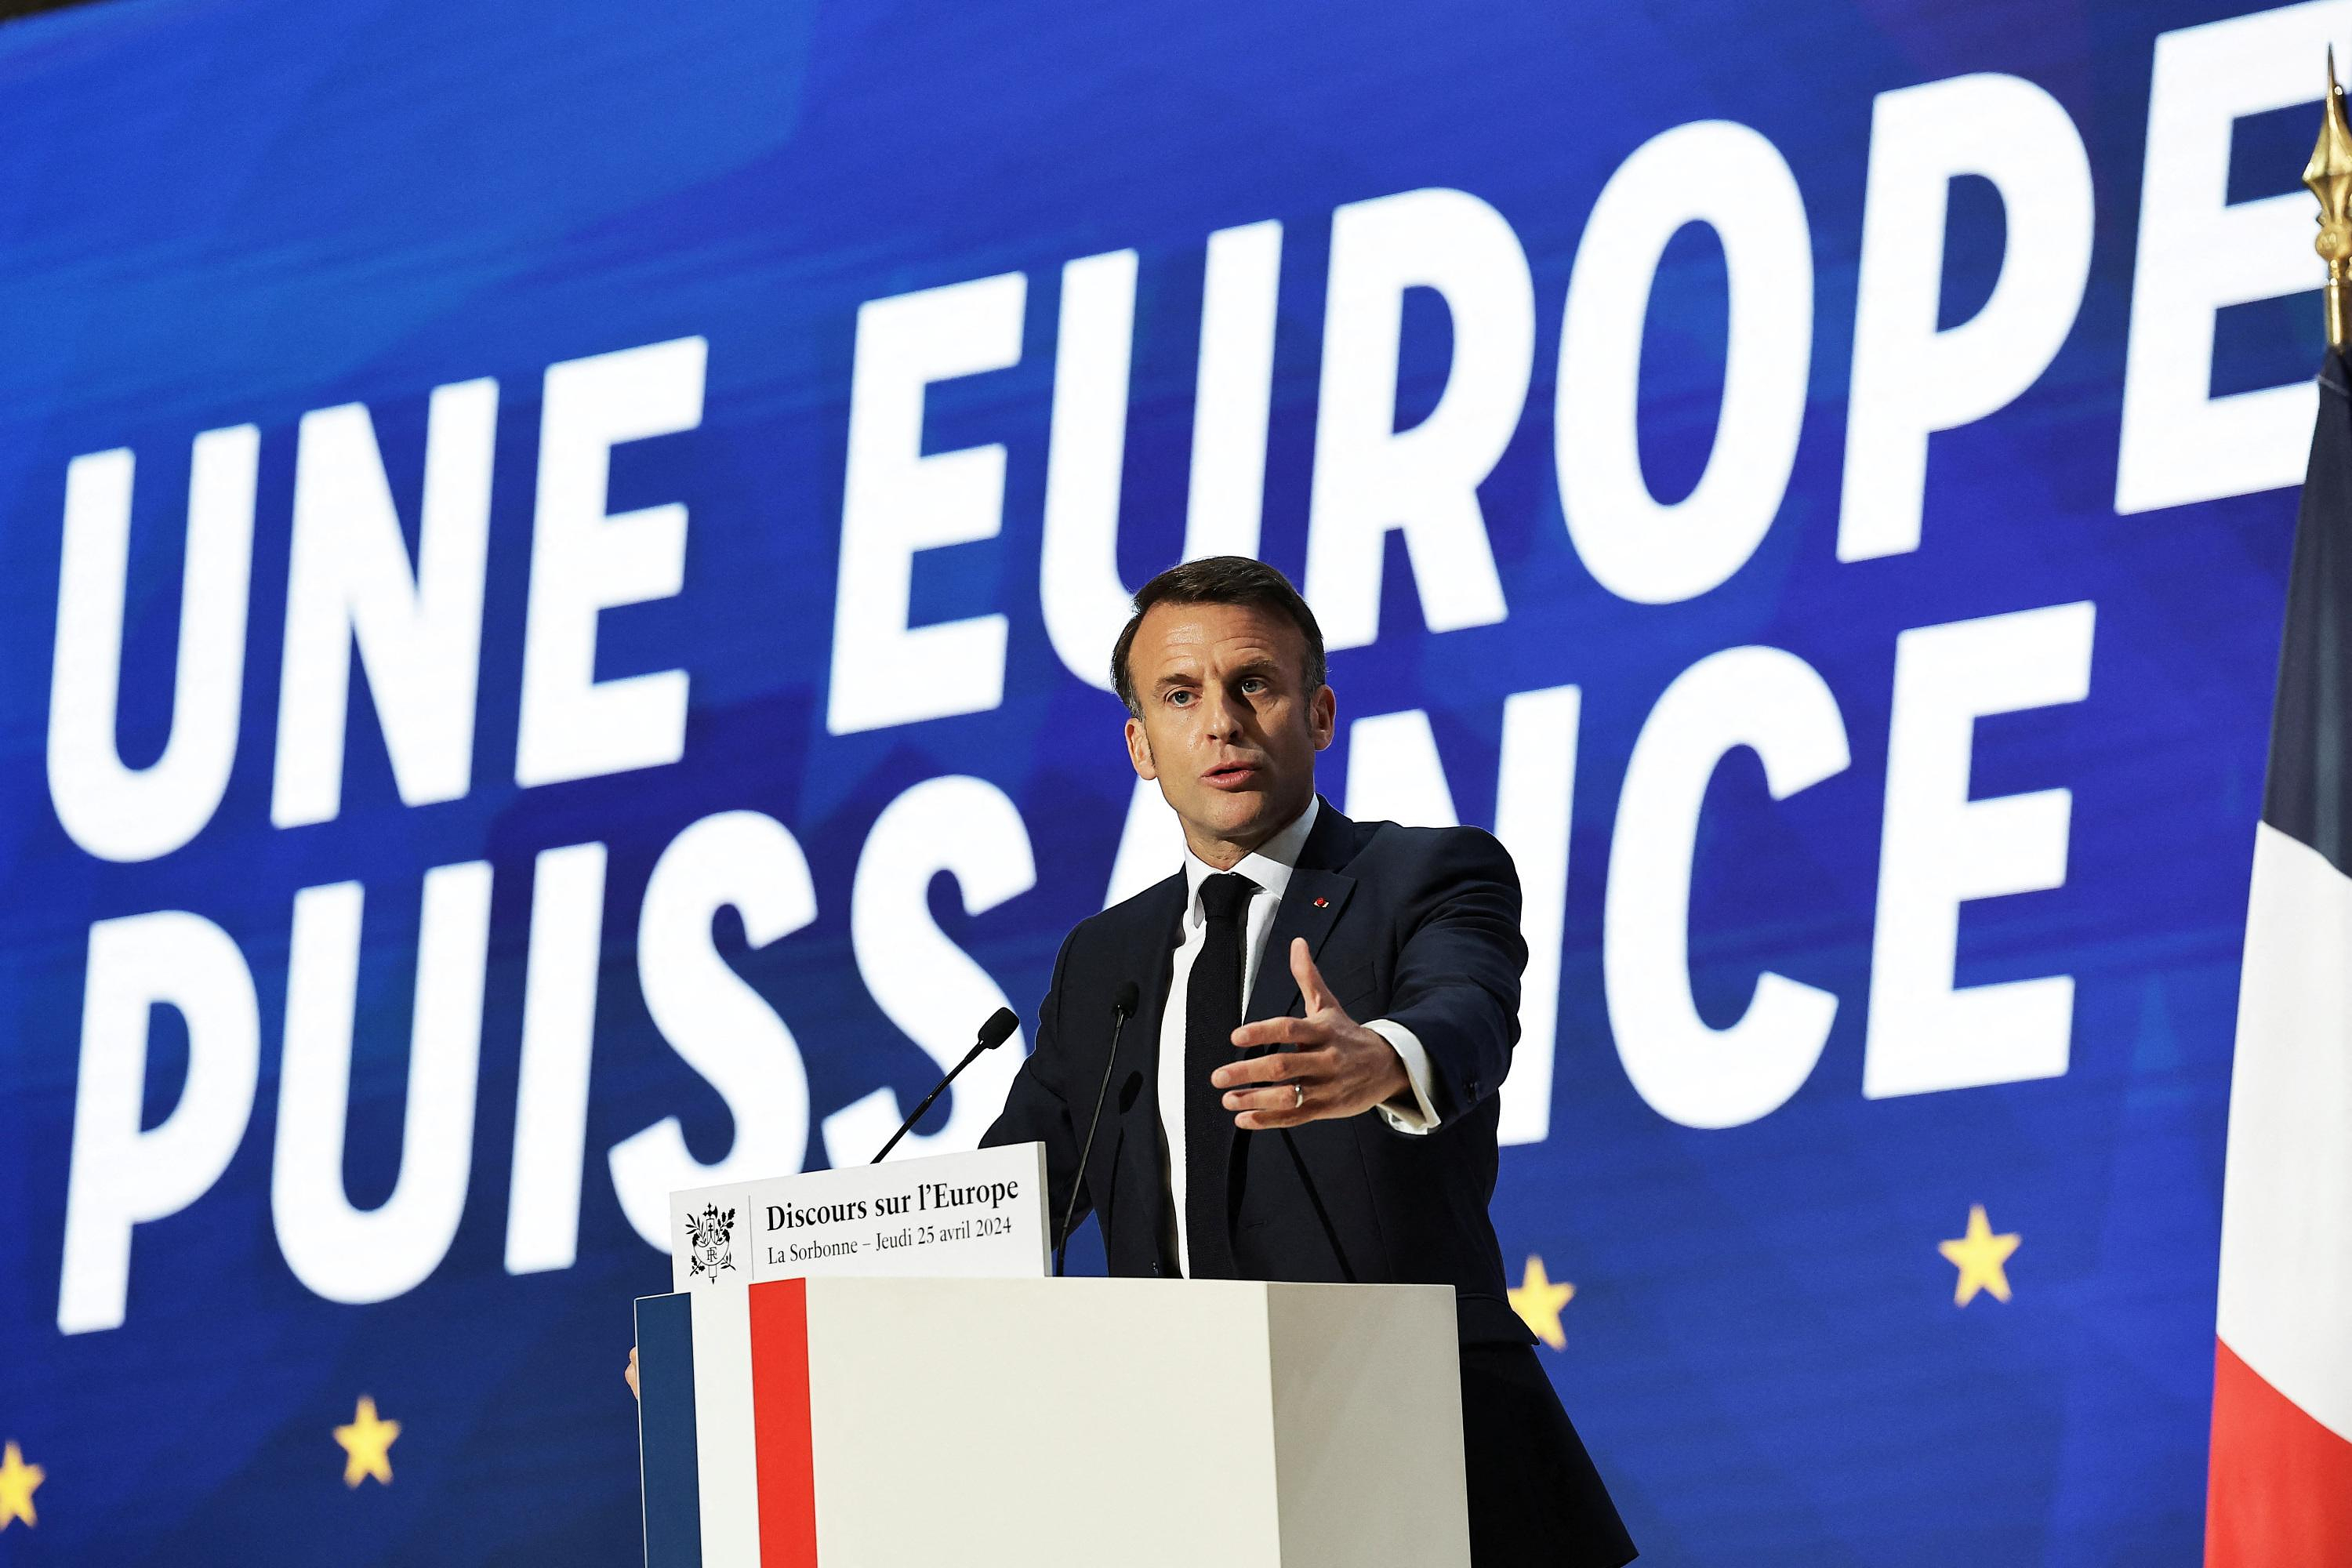 Europeans: Macron's speech at the Sorbonne counted as speaking time on the Renaissance list